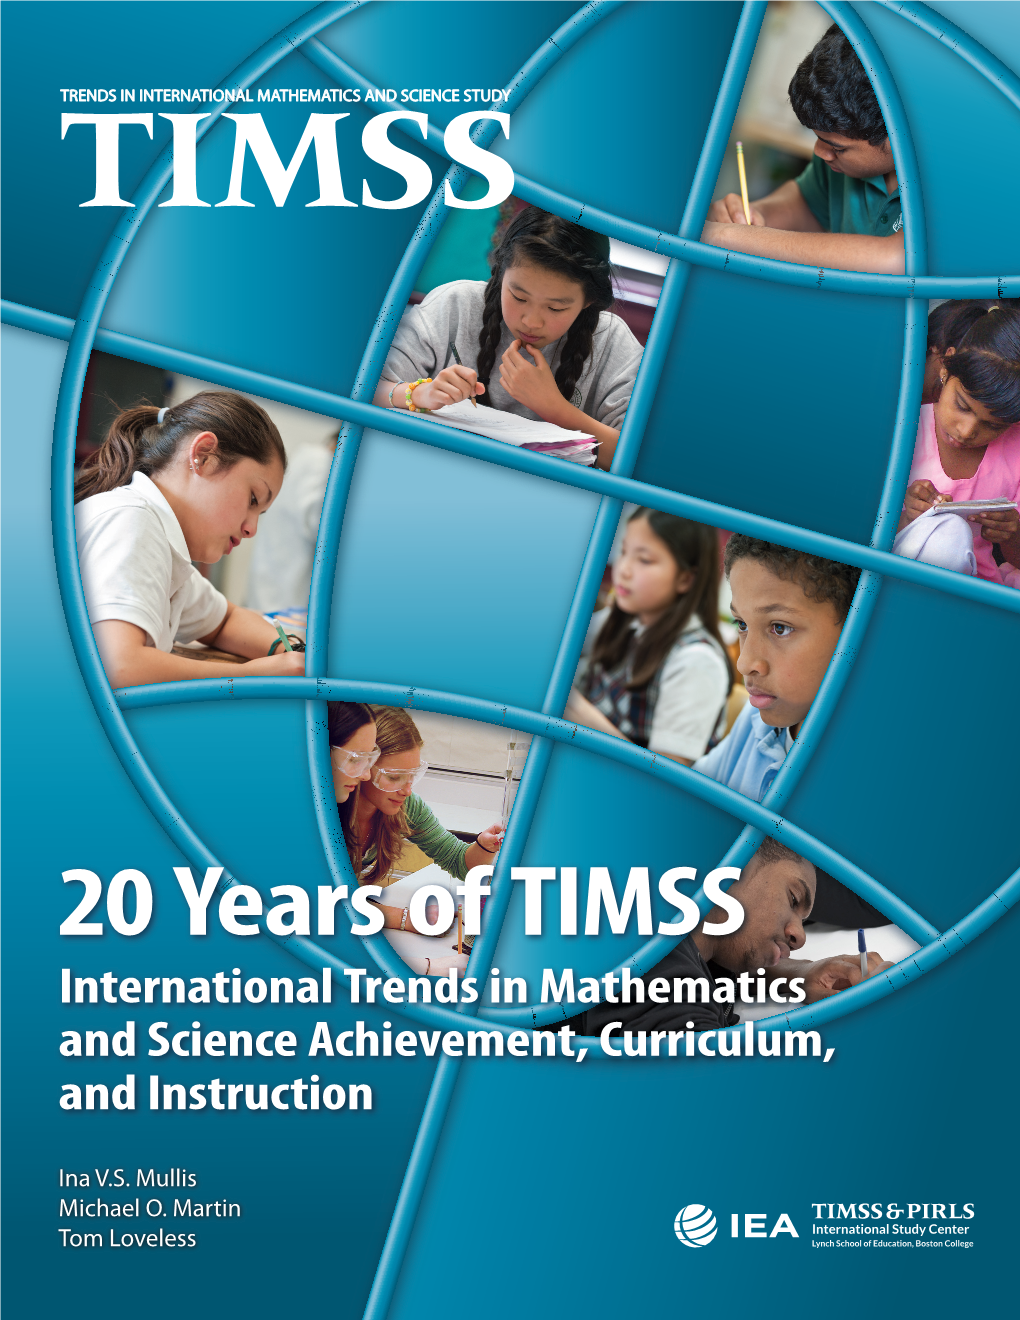 20 Years of TIMSS International Trends in Mathematics and Science Achievement, Curriculum, and Instruction